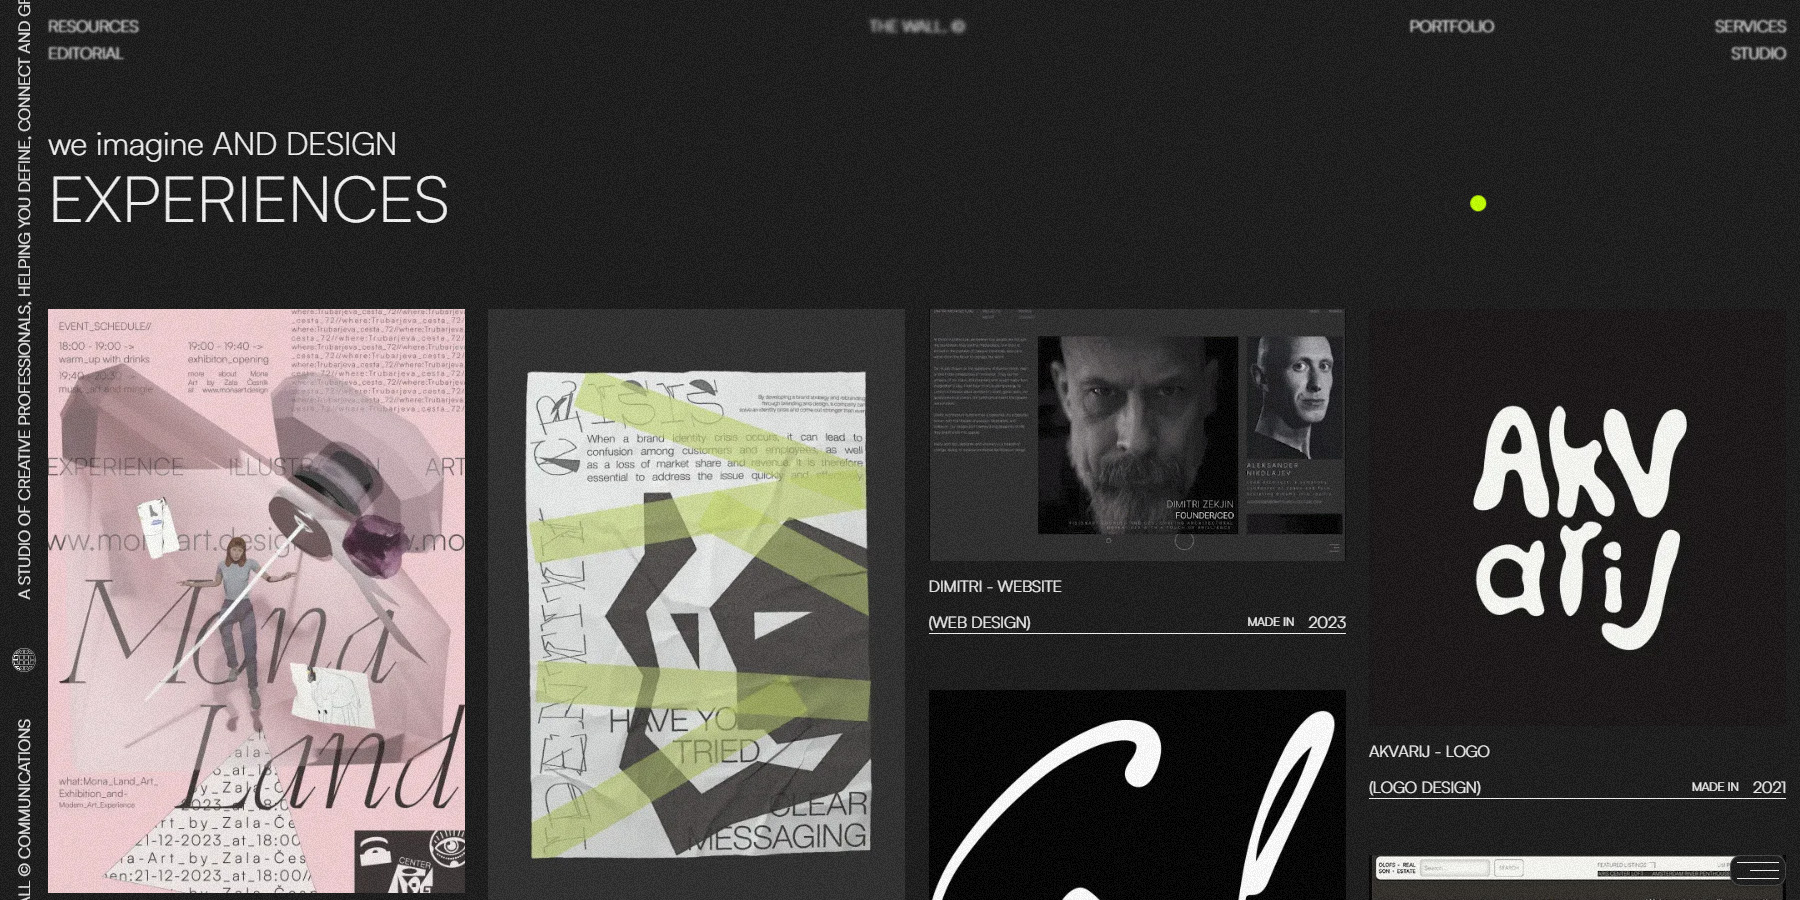 THE WALL. ■ COMMUNICATIONS v2 - Website of the Day